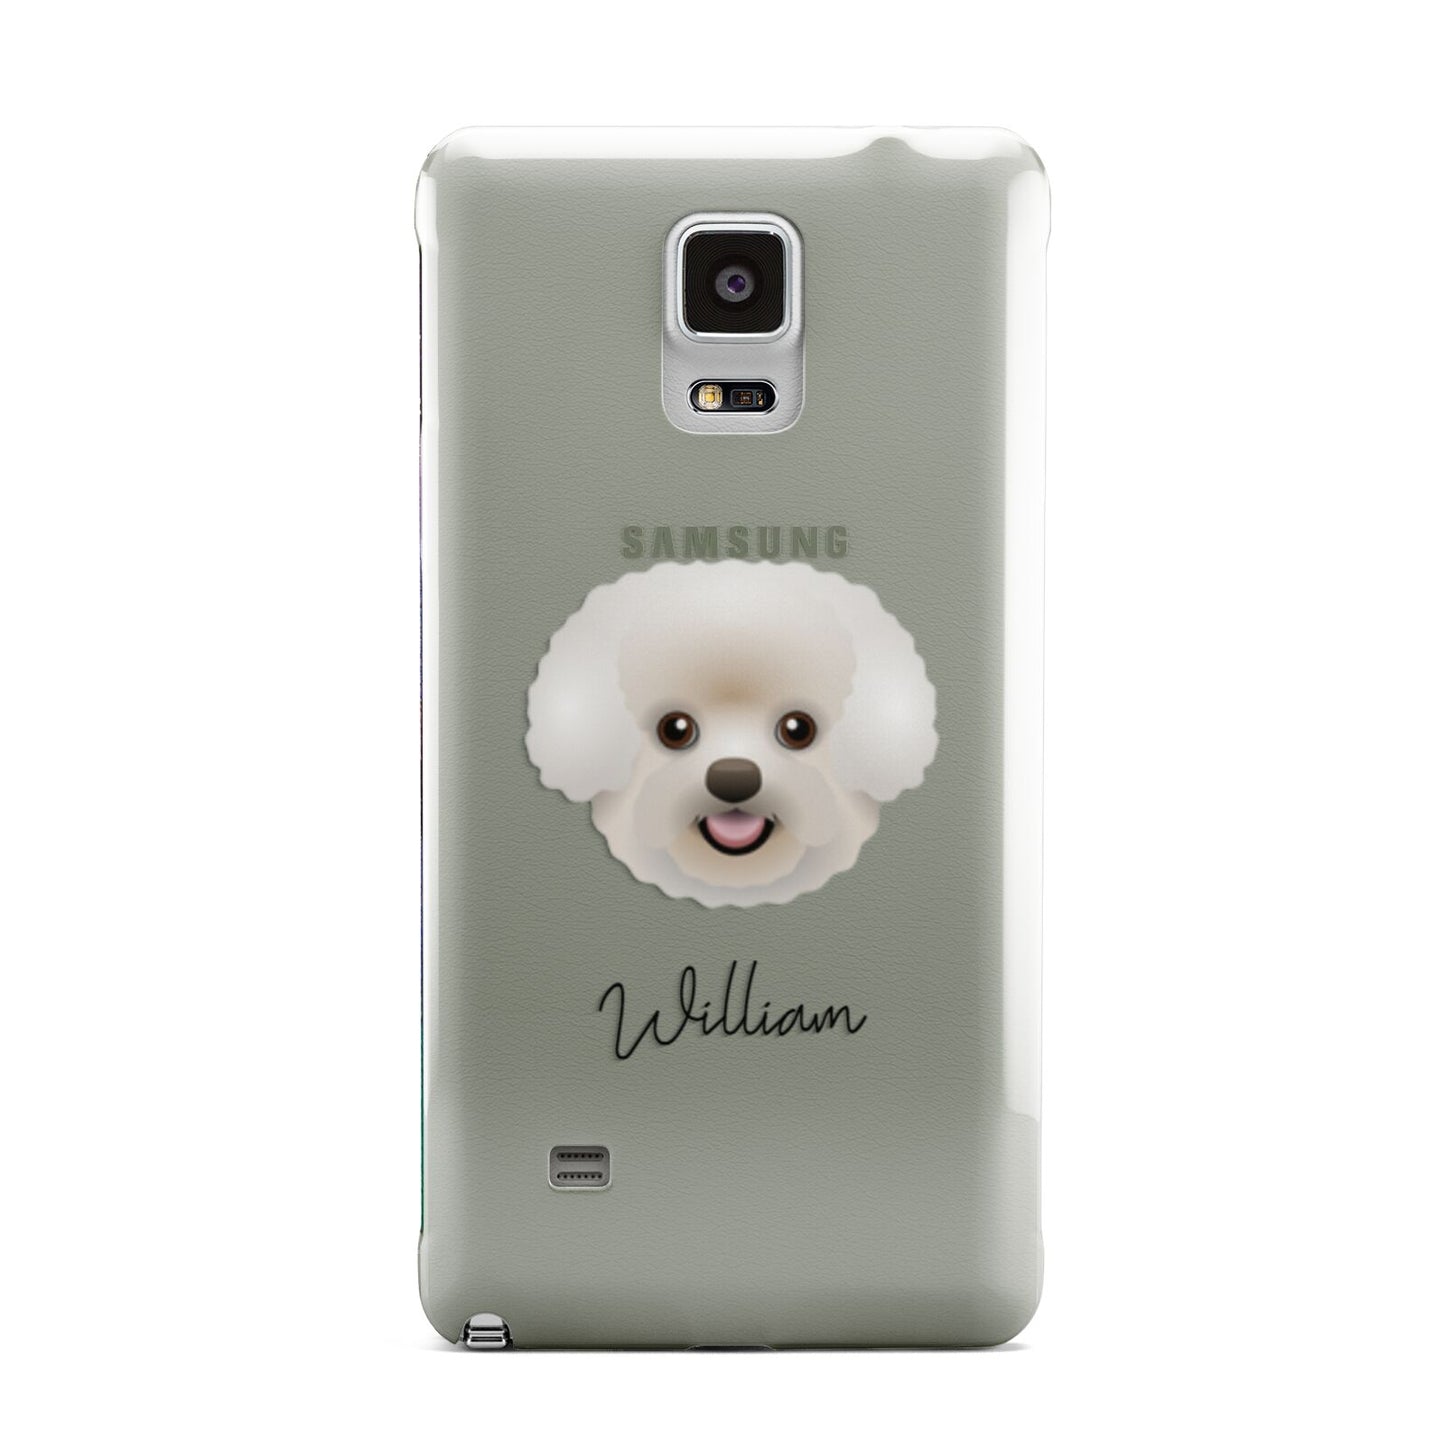 Bichon Frise Personalised Samsung Galaxy Note 4 Case